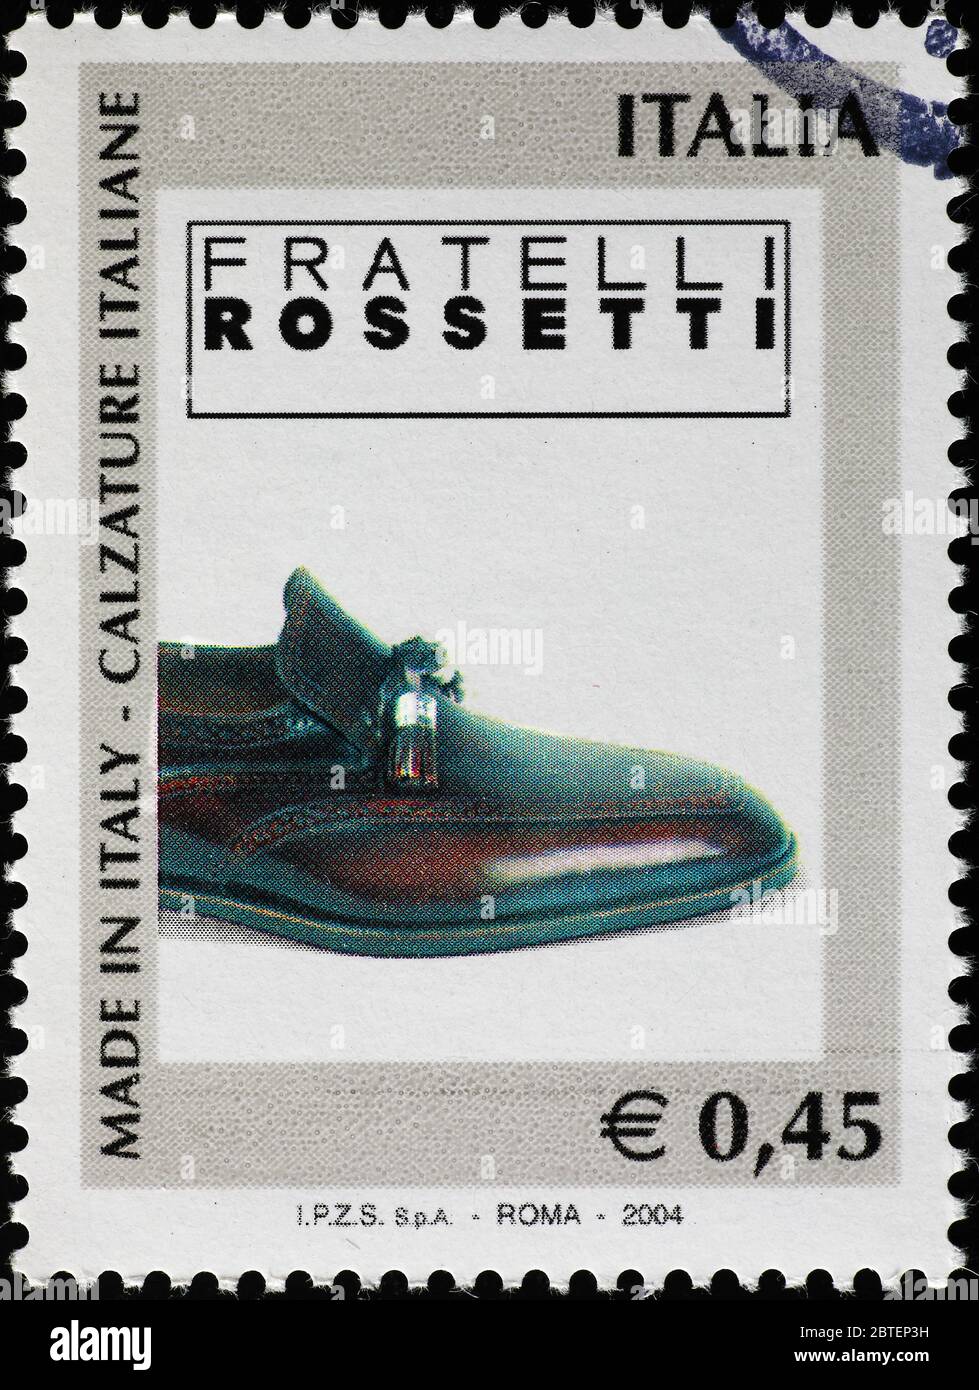 Italian brand of shoes Fratelli Rossetti on postage stamp Stock Photo -  Alamy